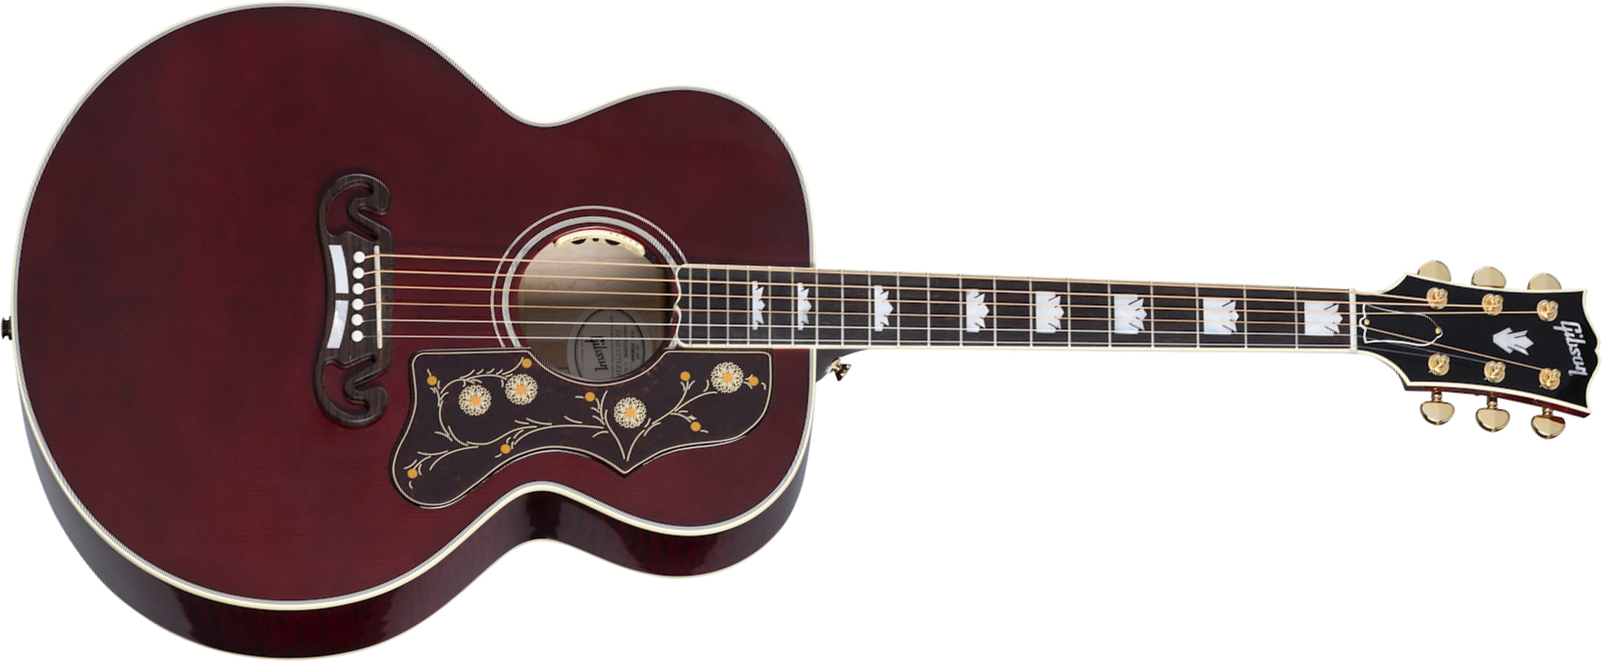 Gibson Sj-200 Standard Modern 2021 Super Jumbo Epicea Erable Rw - Wine Red - Guitare Electro Acoustique - Main picture